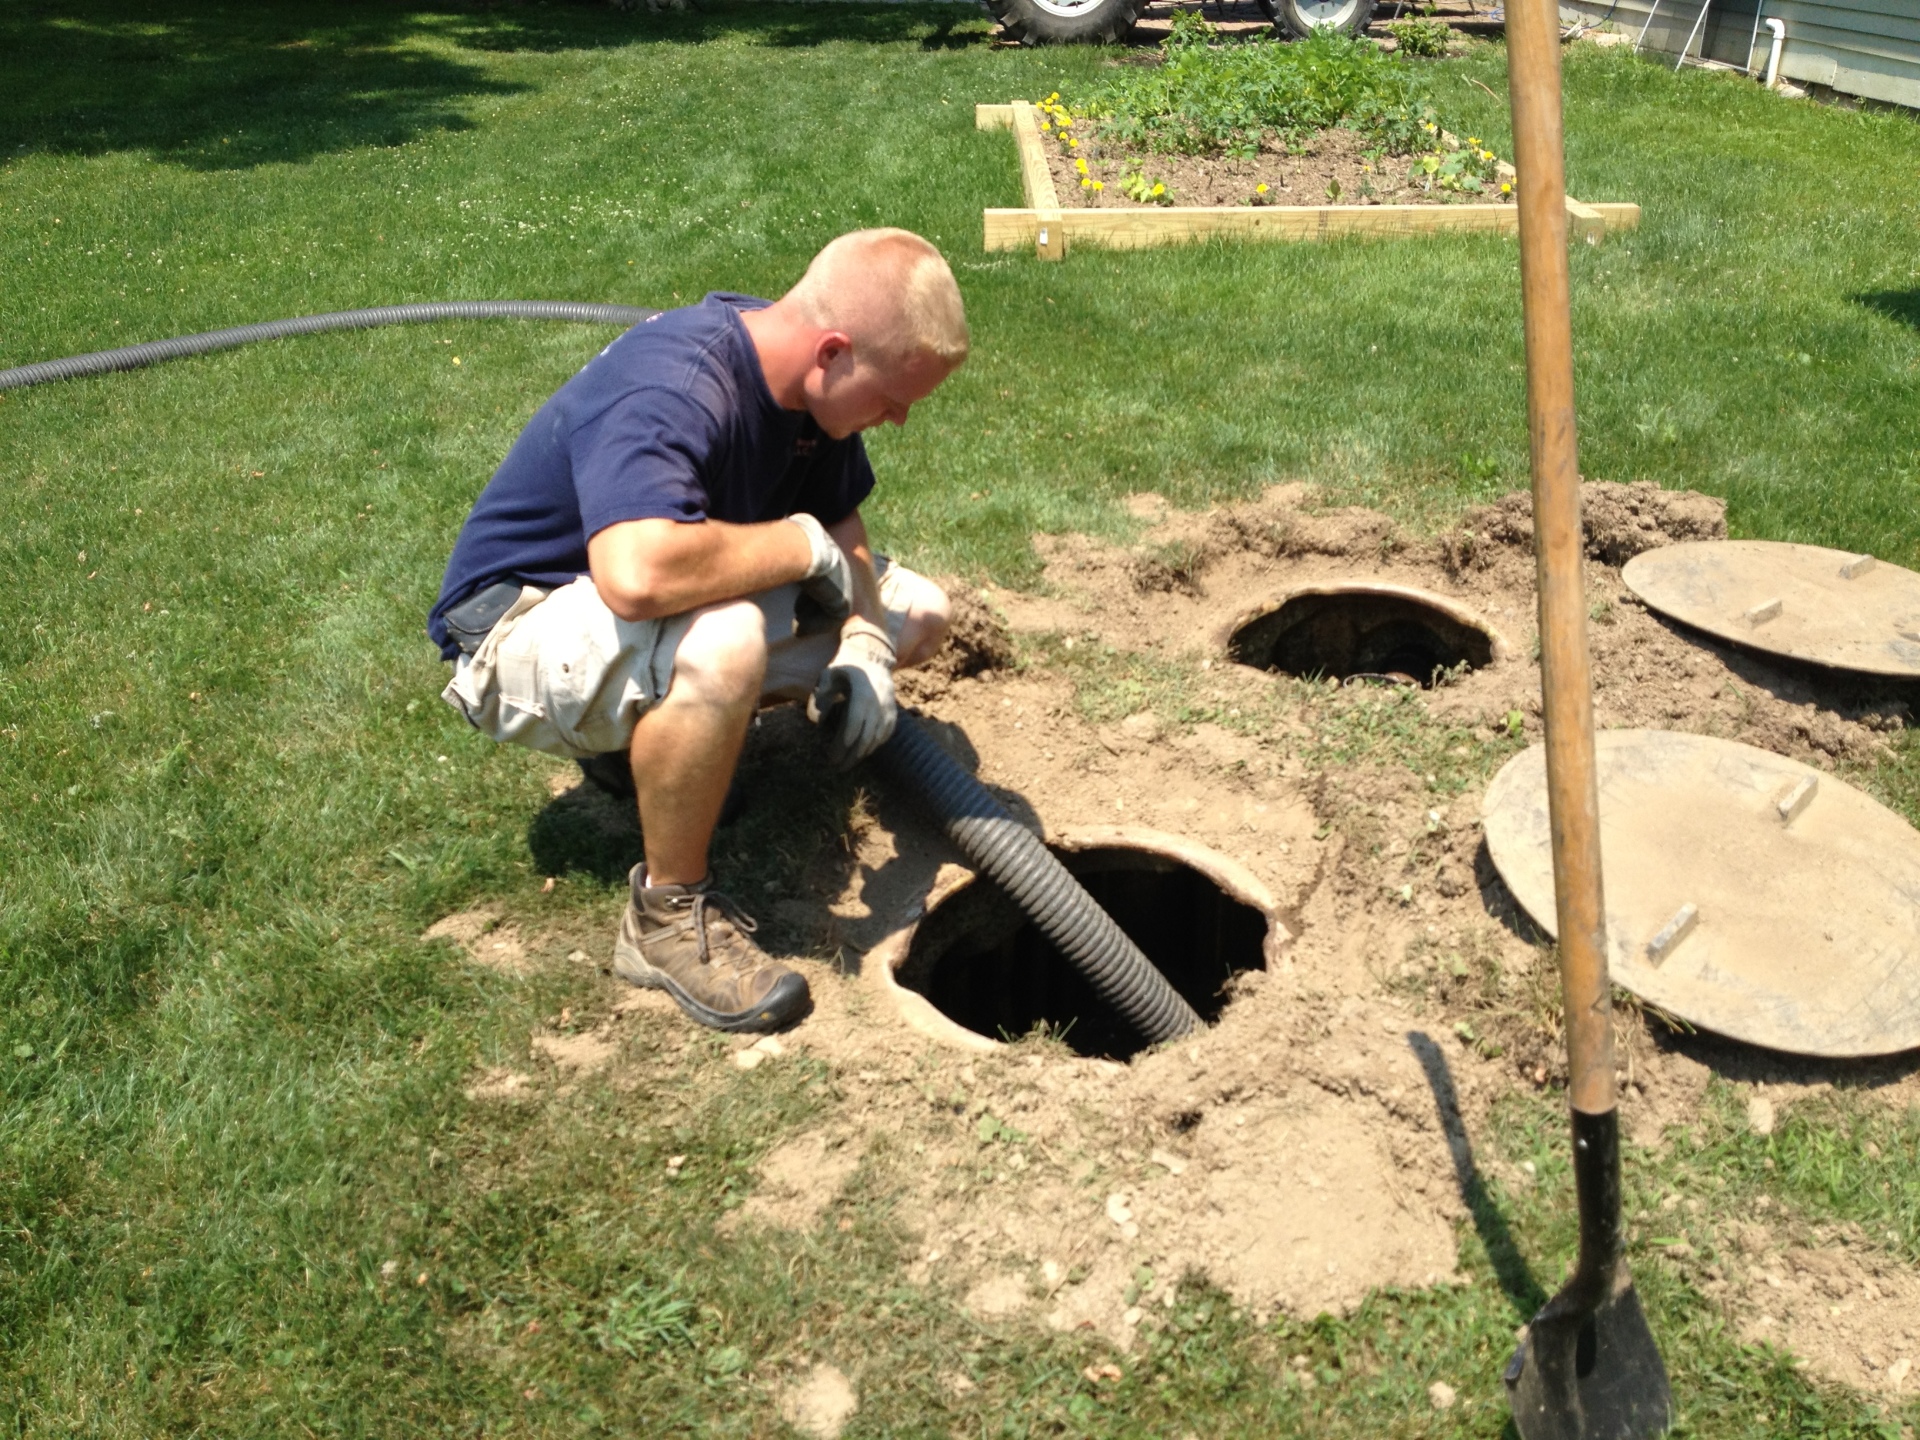 Averill Park Septic: Lee, pumping a septic tank.